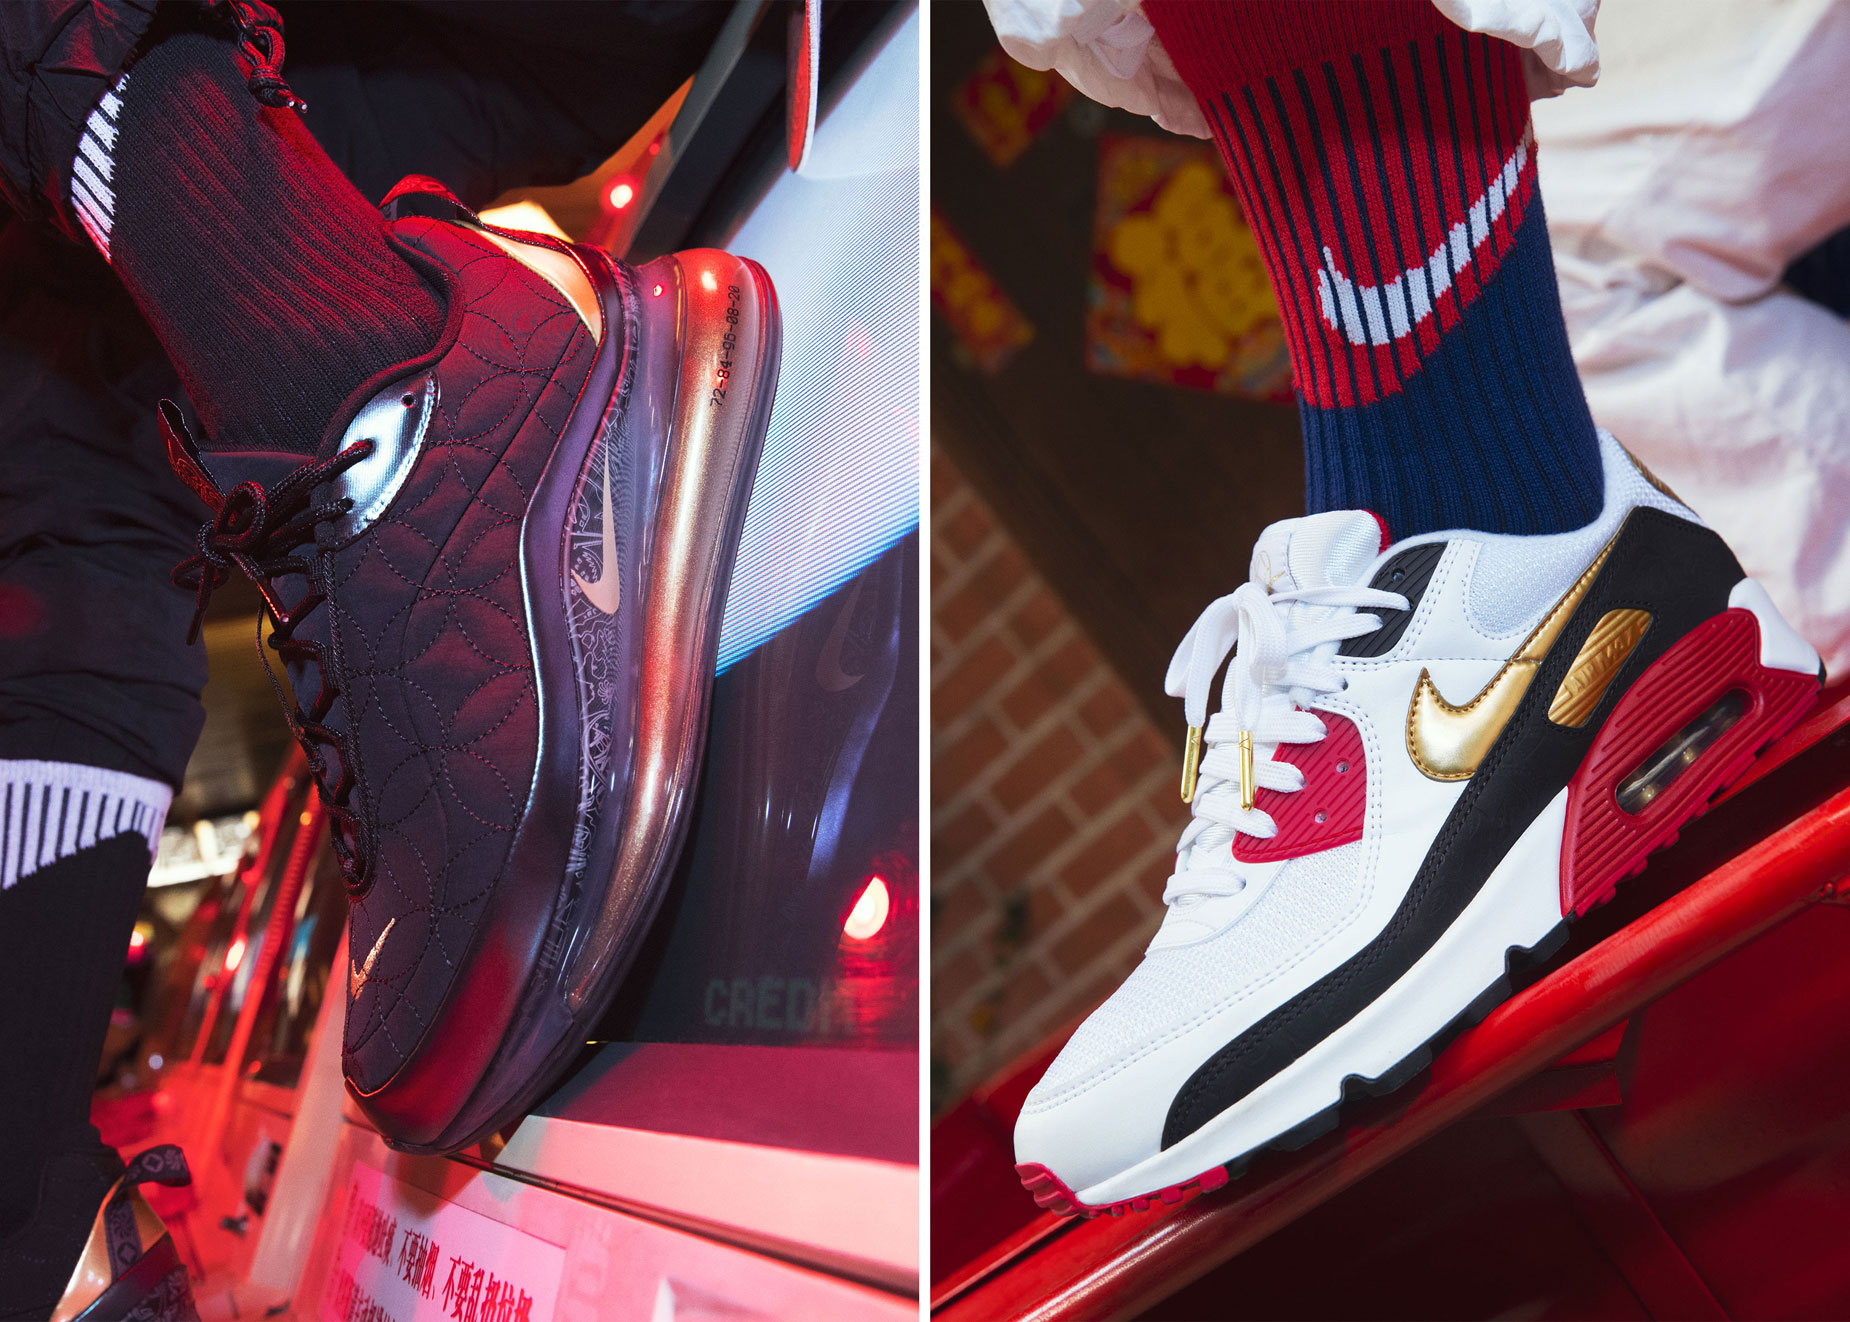 Nike and Jordan Chinese New Year 2020 Collection